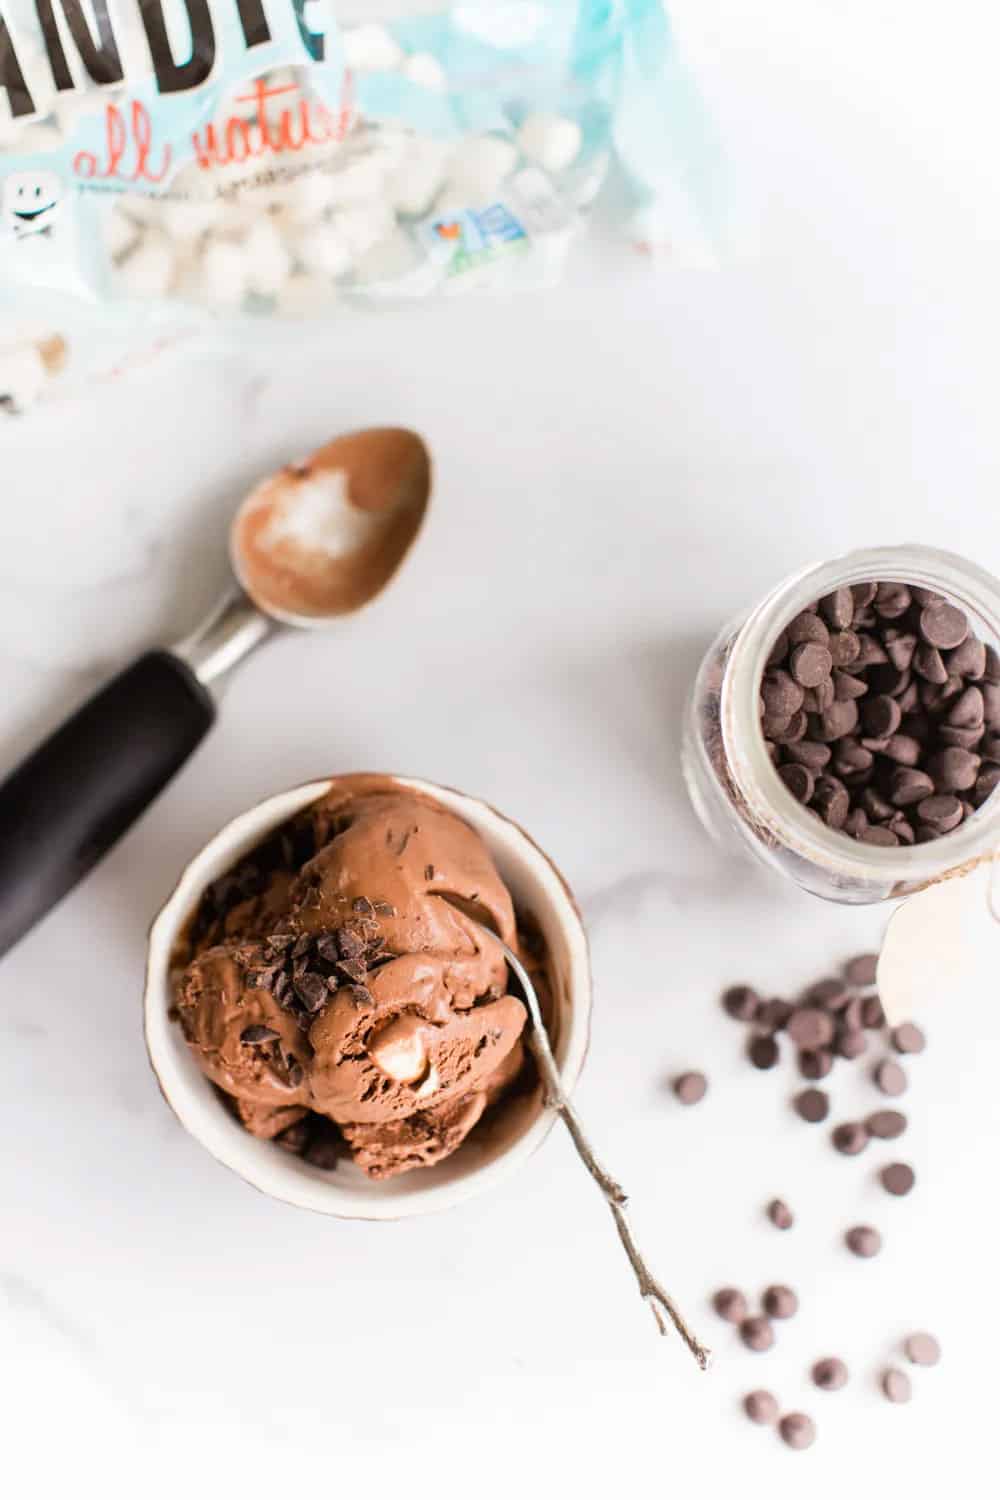 vegan rocky road ice cream in a bowl with chocolate chips on the right and an ice cream scoop on the left for aesthetic